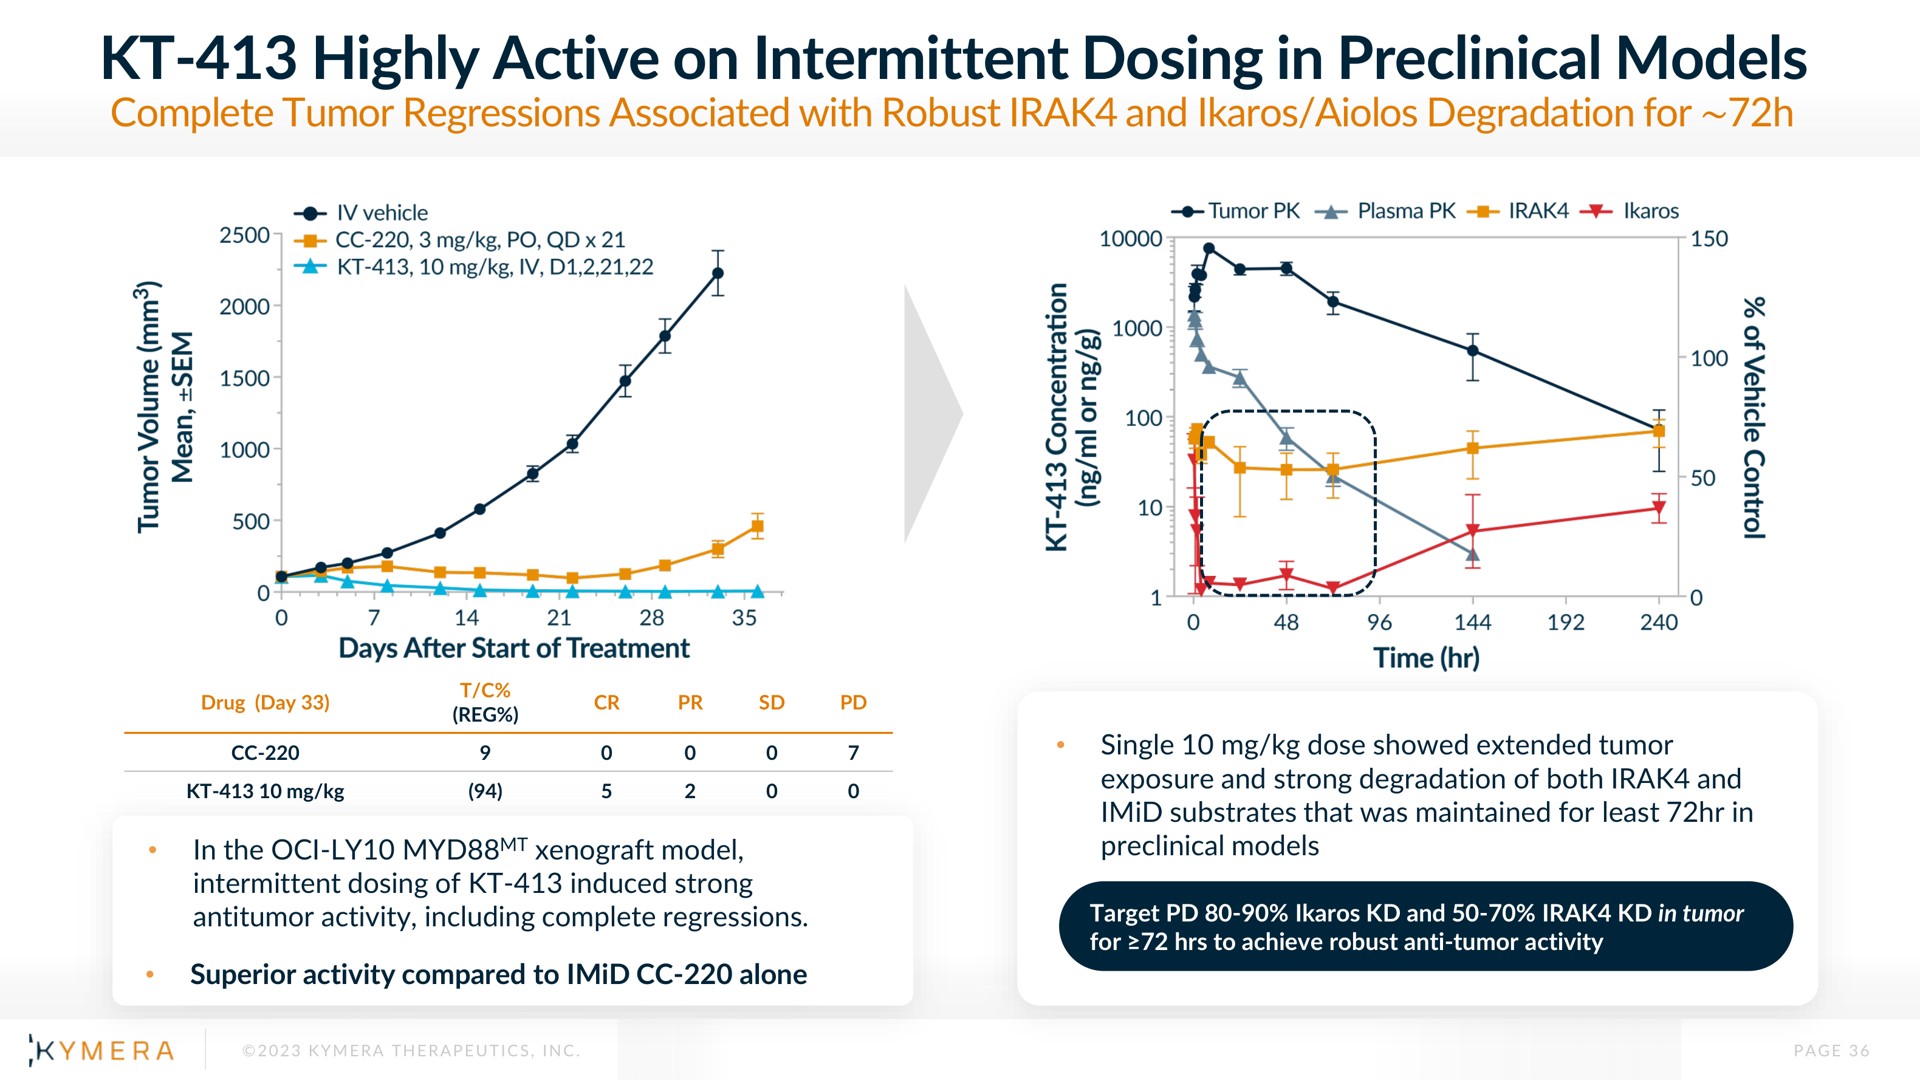 highly active on intermittent dosing in preclinical models | Kymera